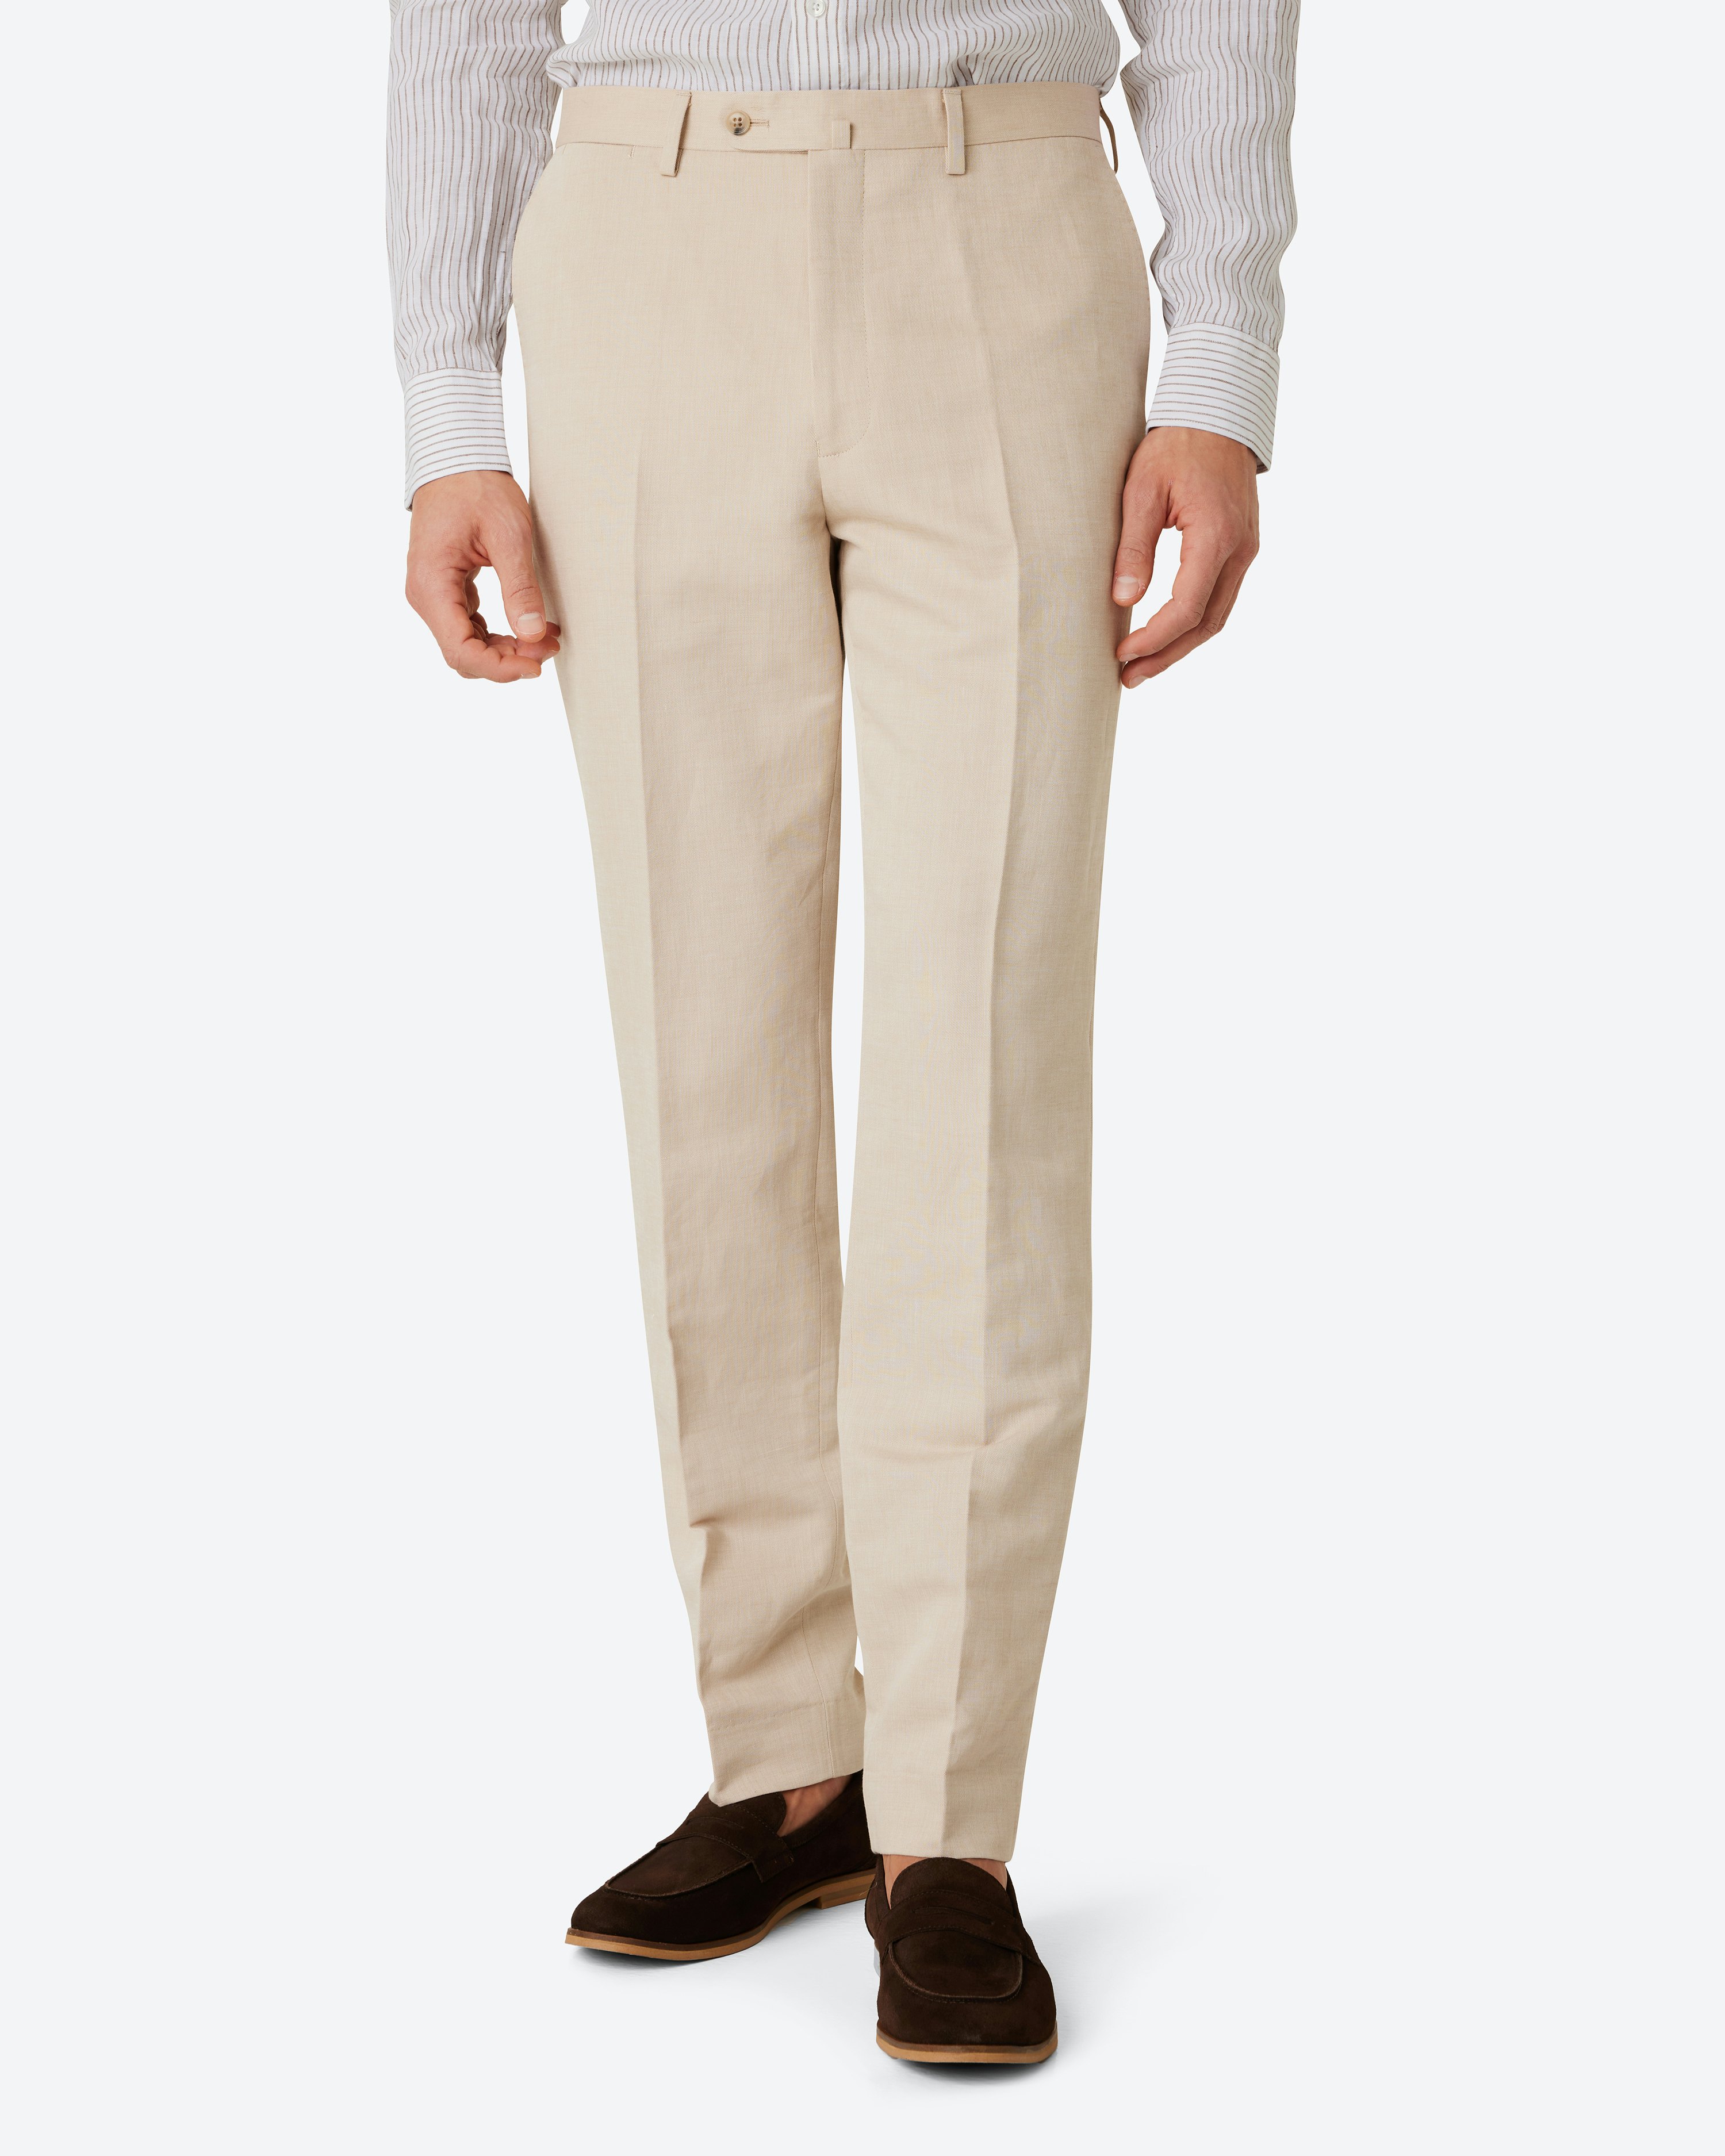 These Glory Days Archer Cotton Linen Suit Trouser Off white